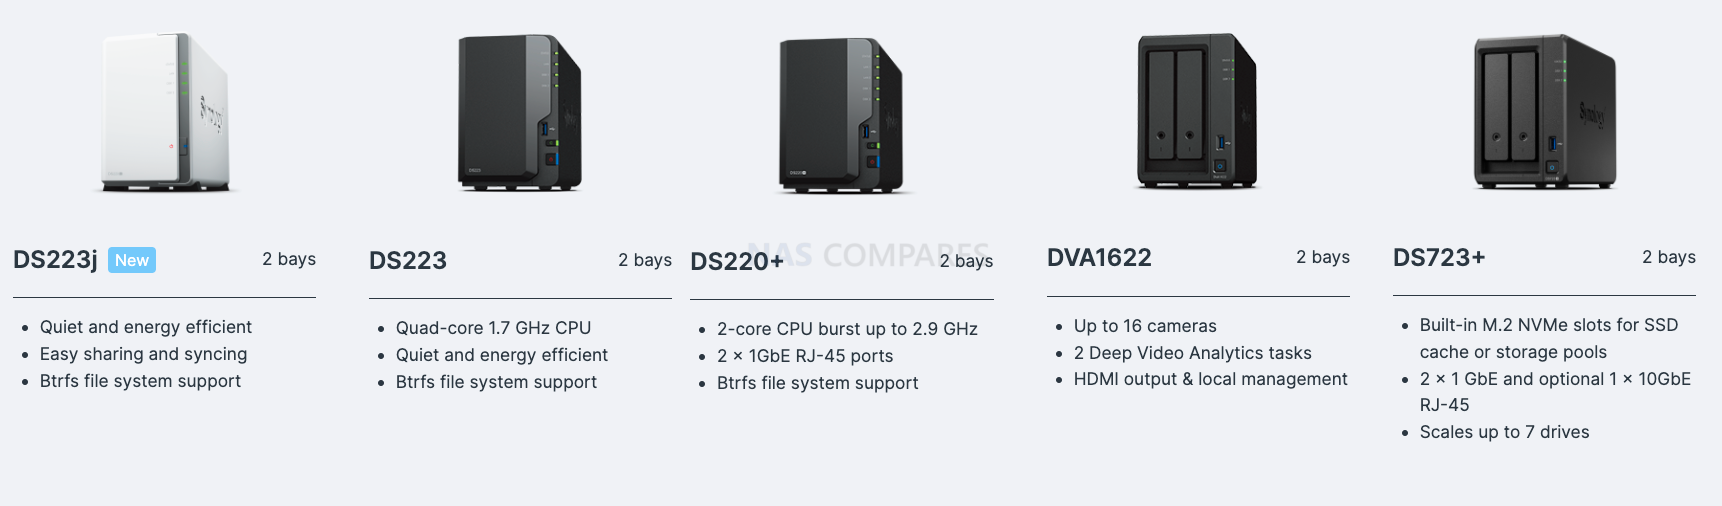 Synology 2-bay NAS range compared (DS223j, DS223, DS220+, DVA1622, DS723+)  – NAS Compares